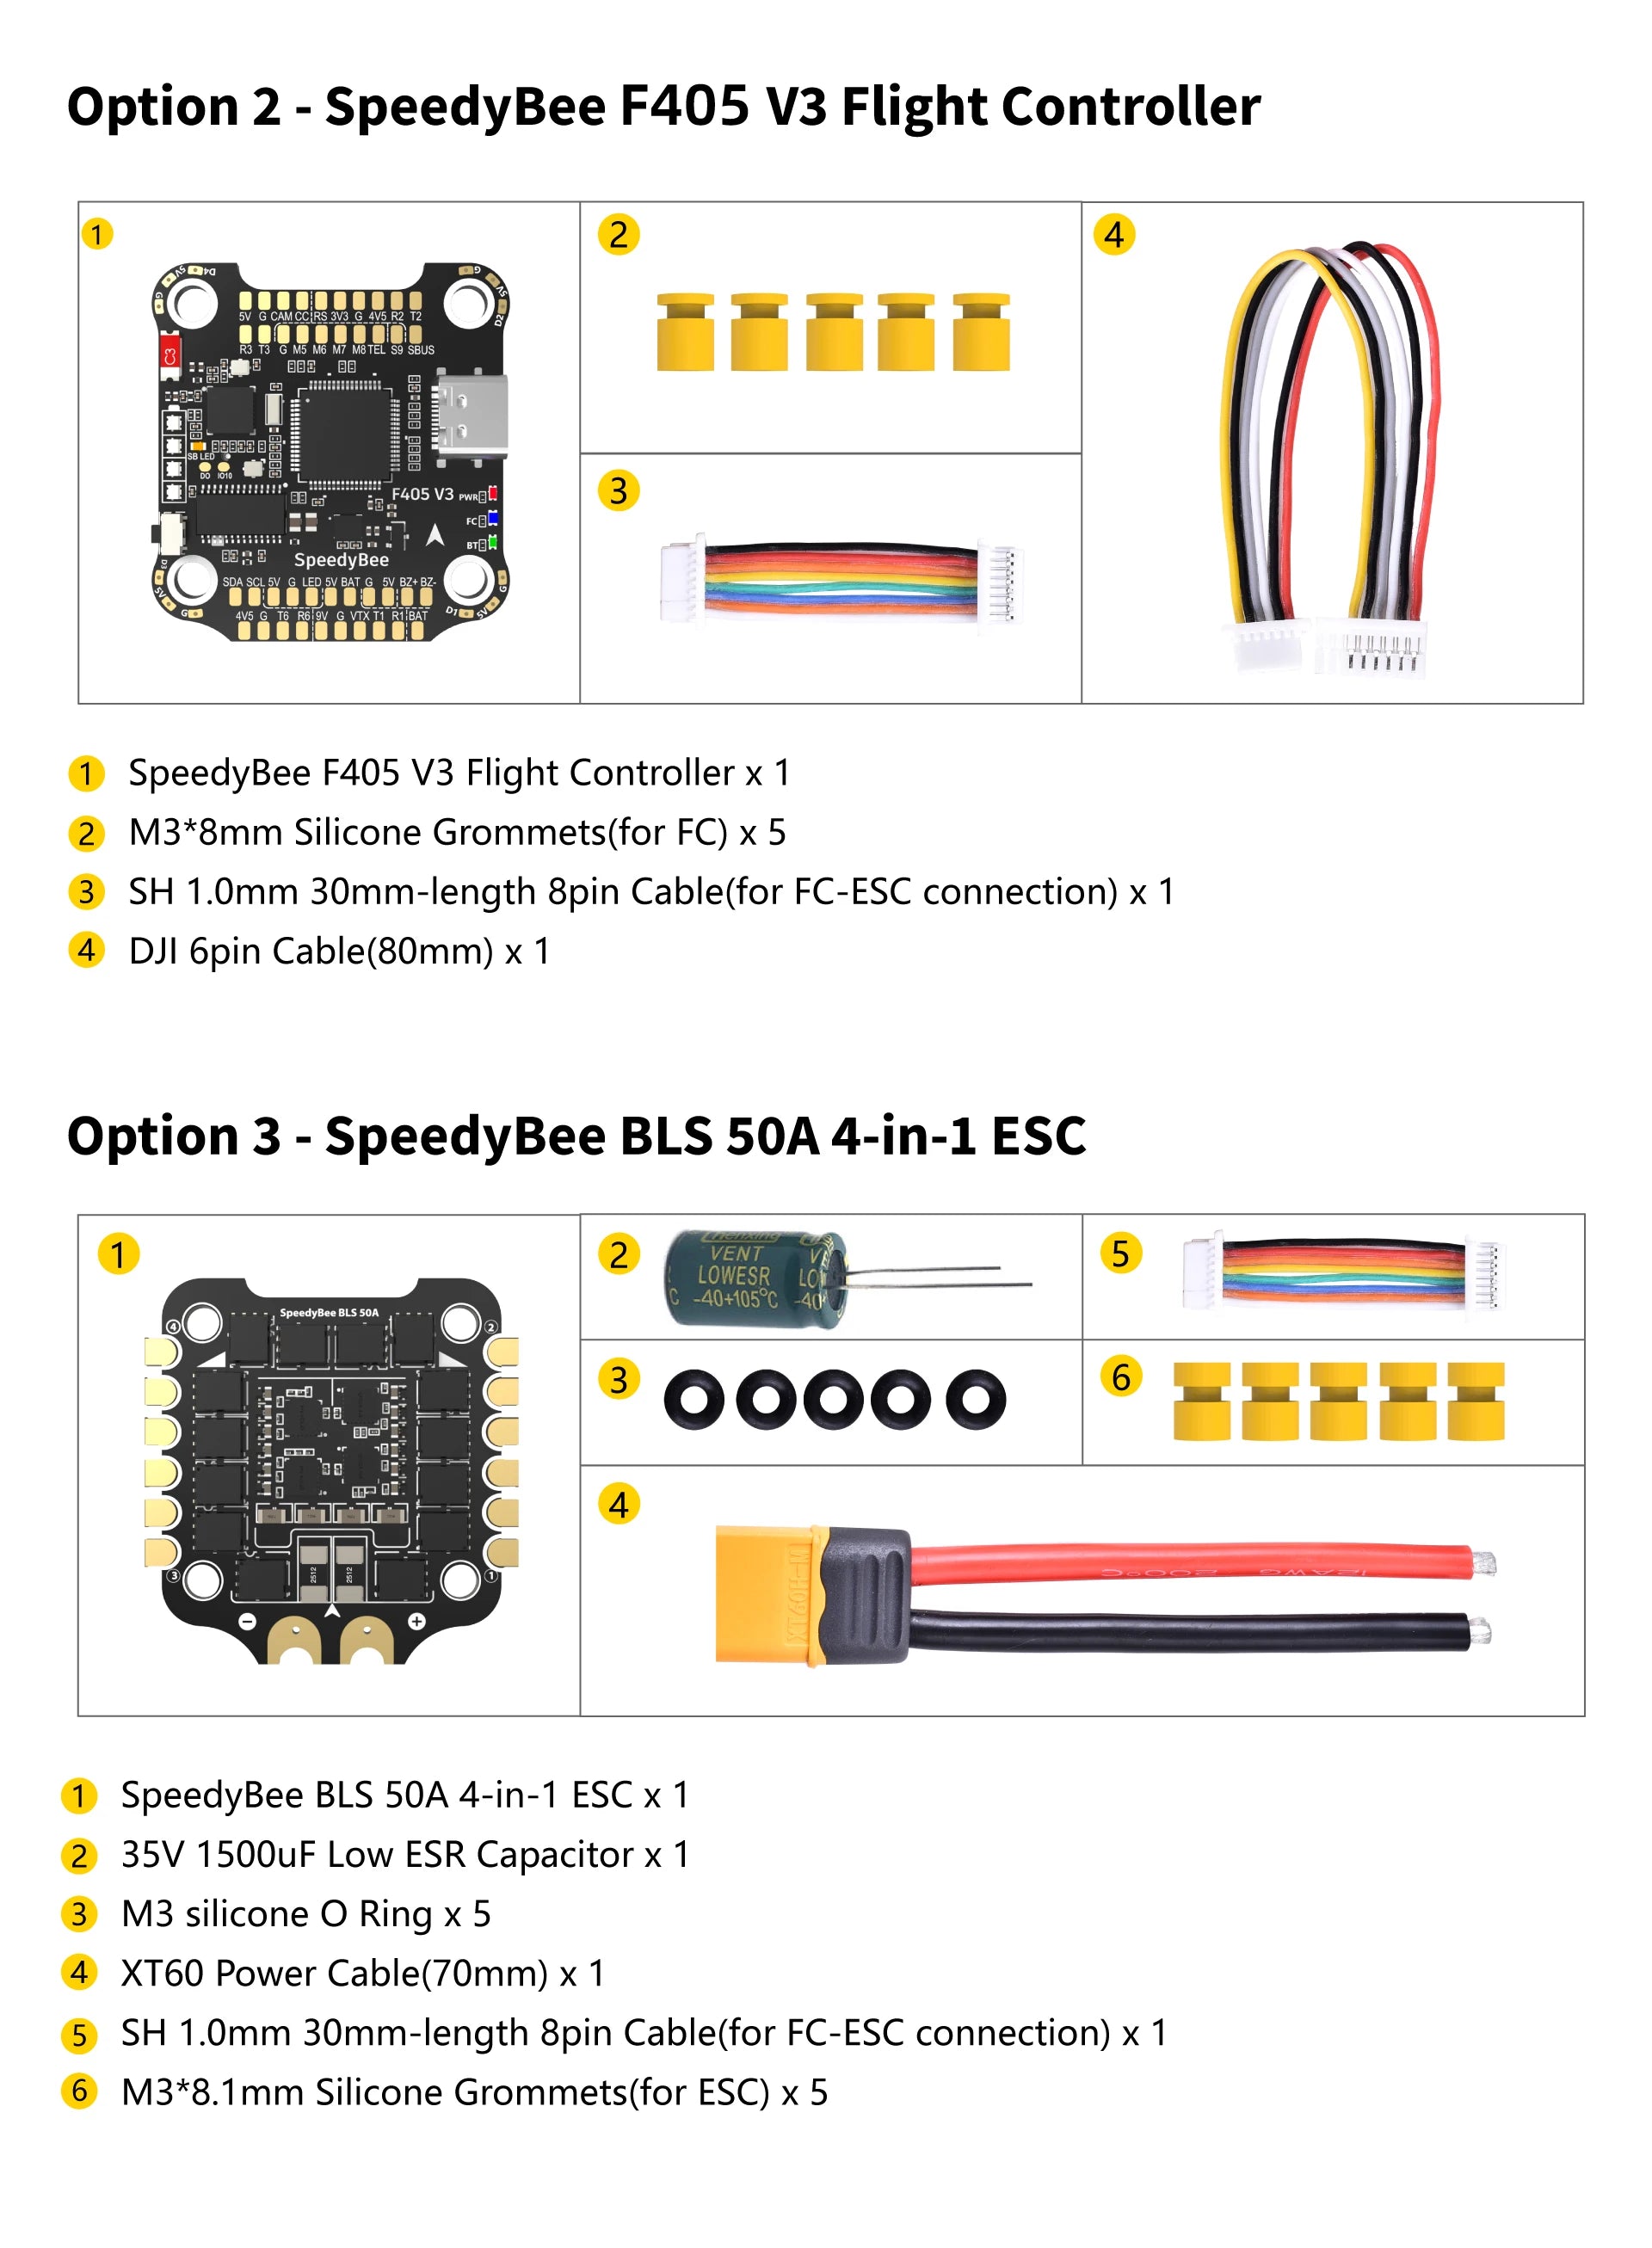 SpeedyBee F405 V3 50A Stack, Please set scale = 386 and Offset = 0. For SpeedyBee BLS 50